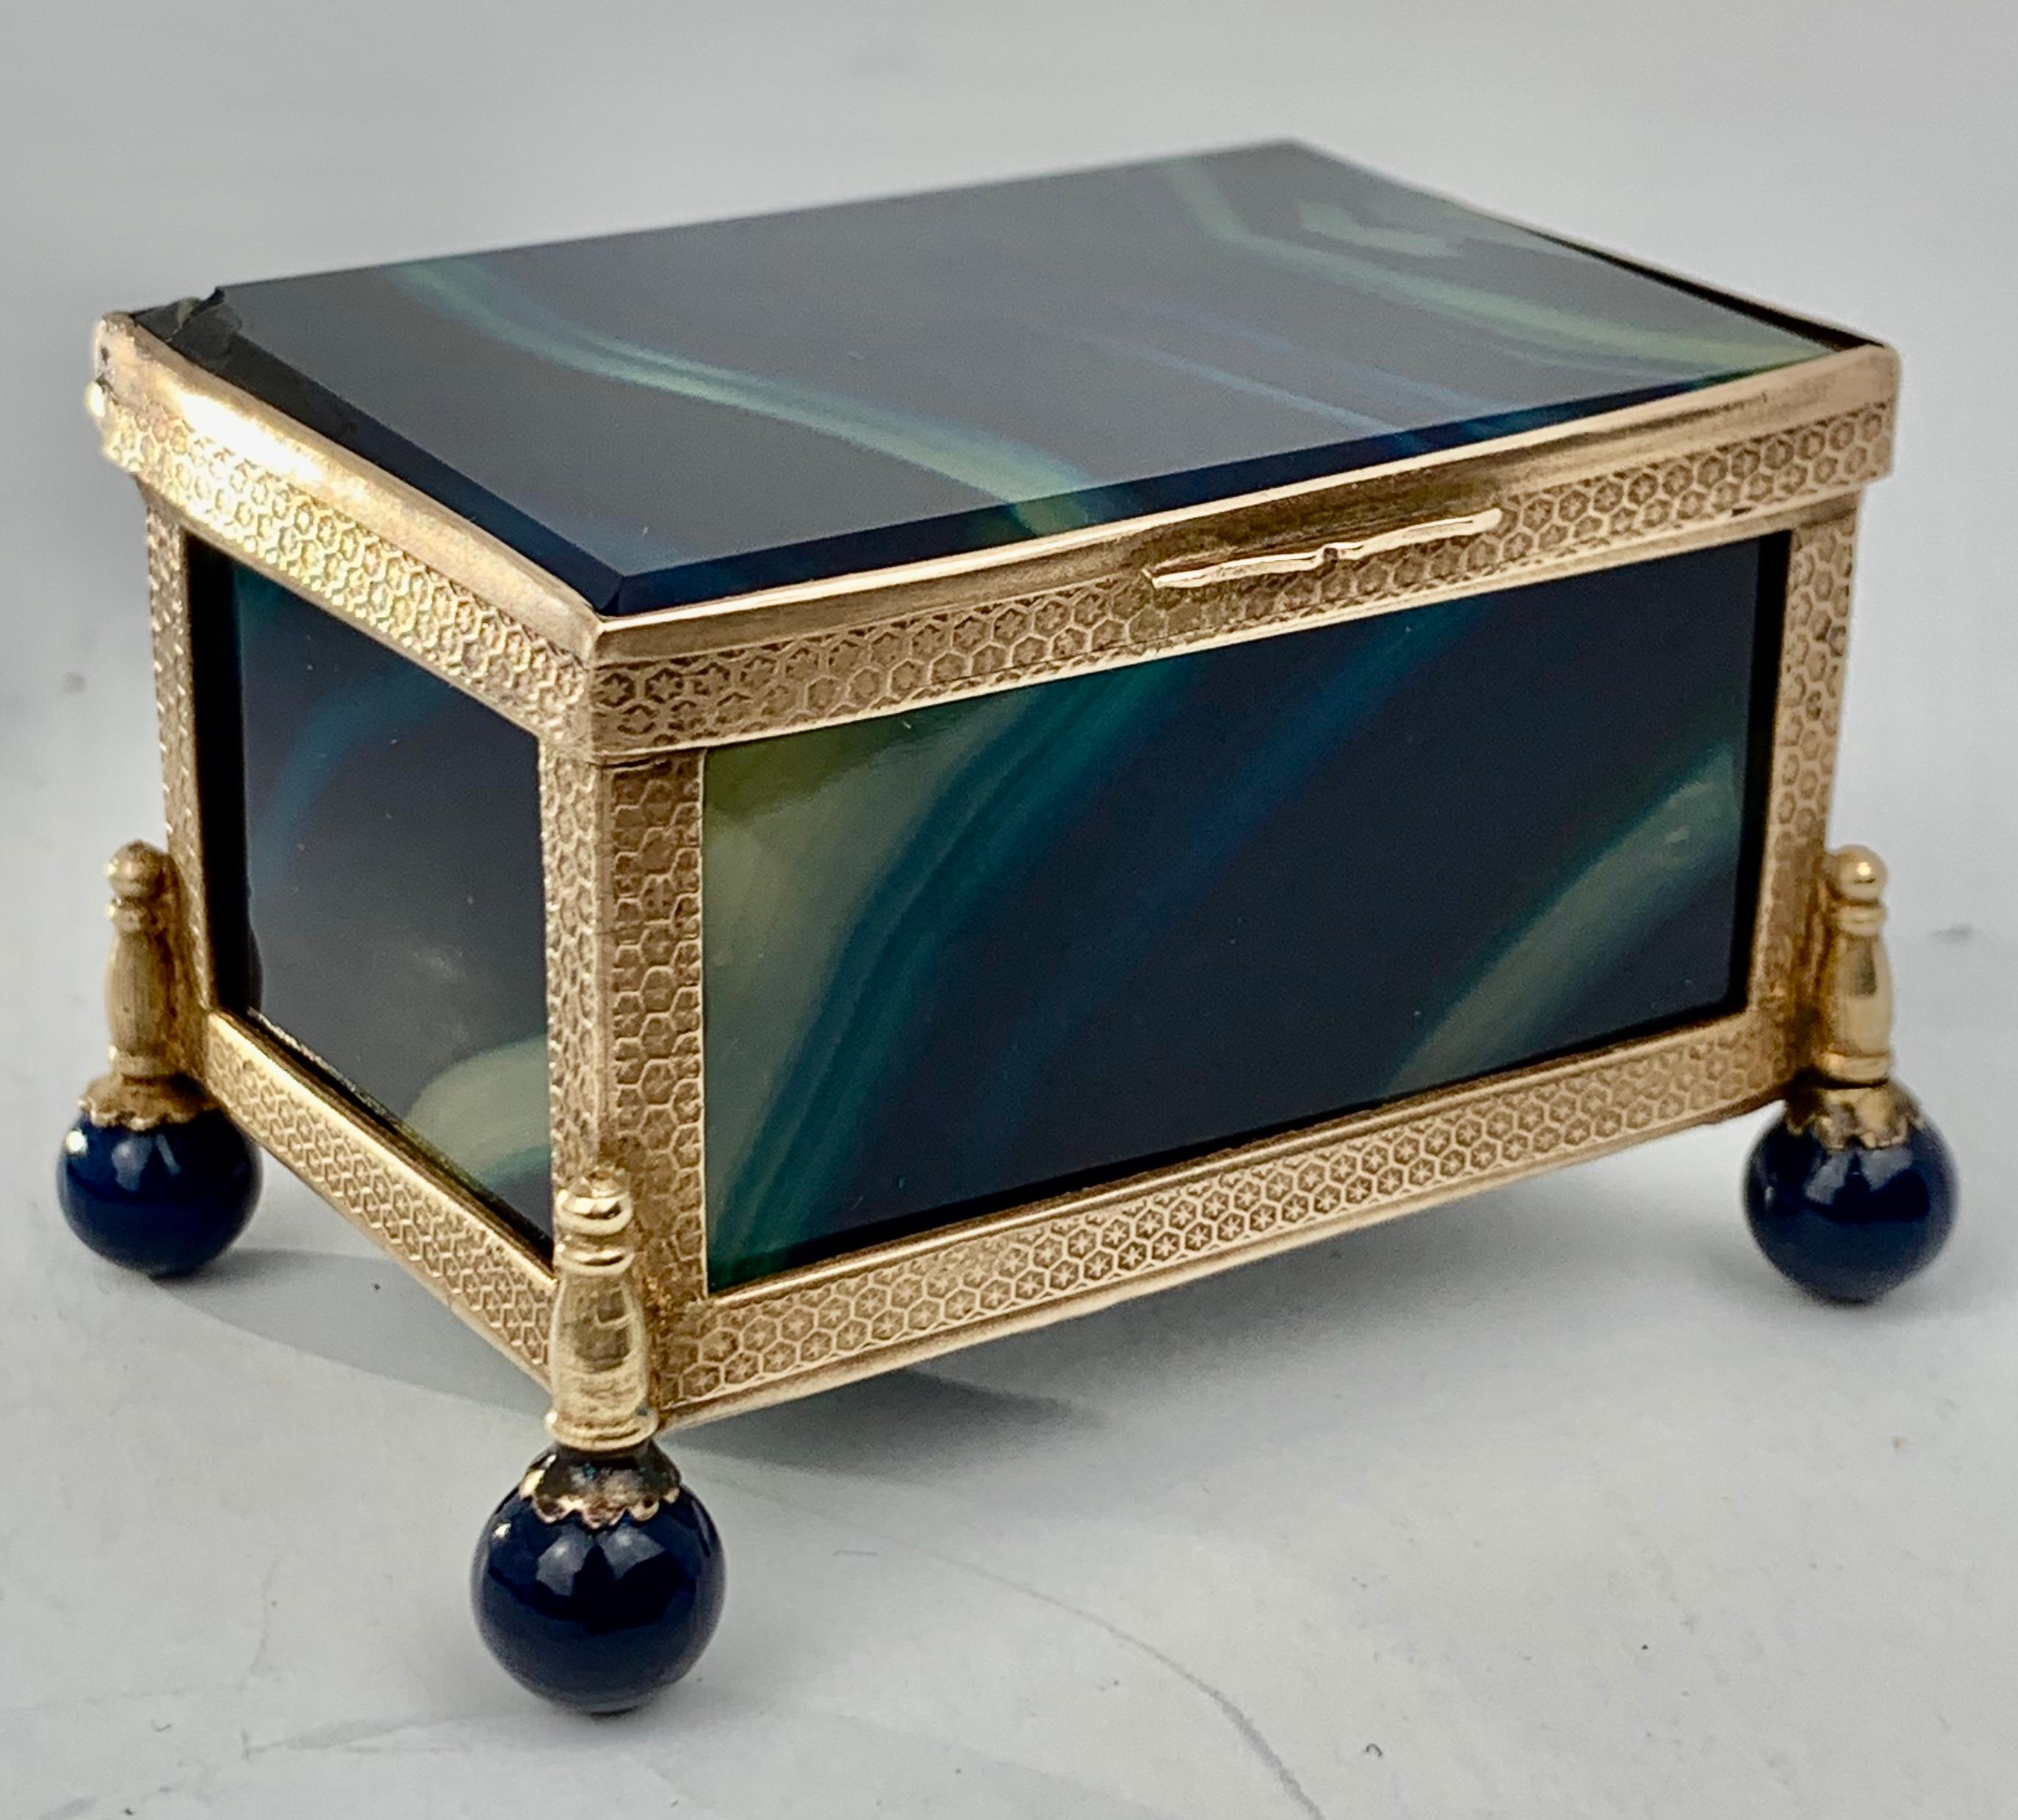 Stunning blue banded hinged agate box with gilt honeycomb patterned frame, the pieces of stone are beveled on the interior while the petit box rests on ball feet.  There is a tiny chip on the top back left corner.
How handsome the carefully selected